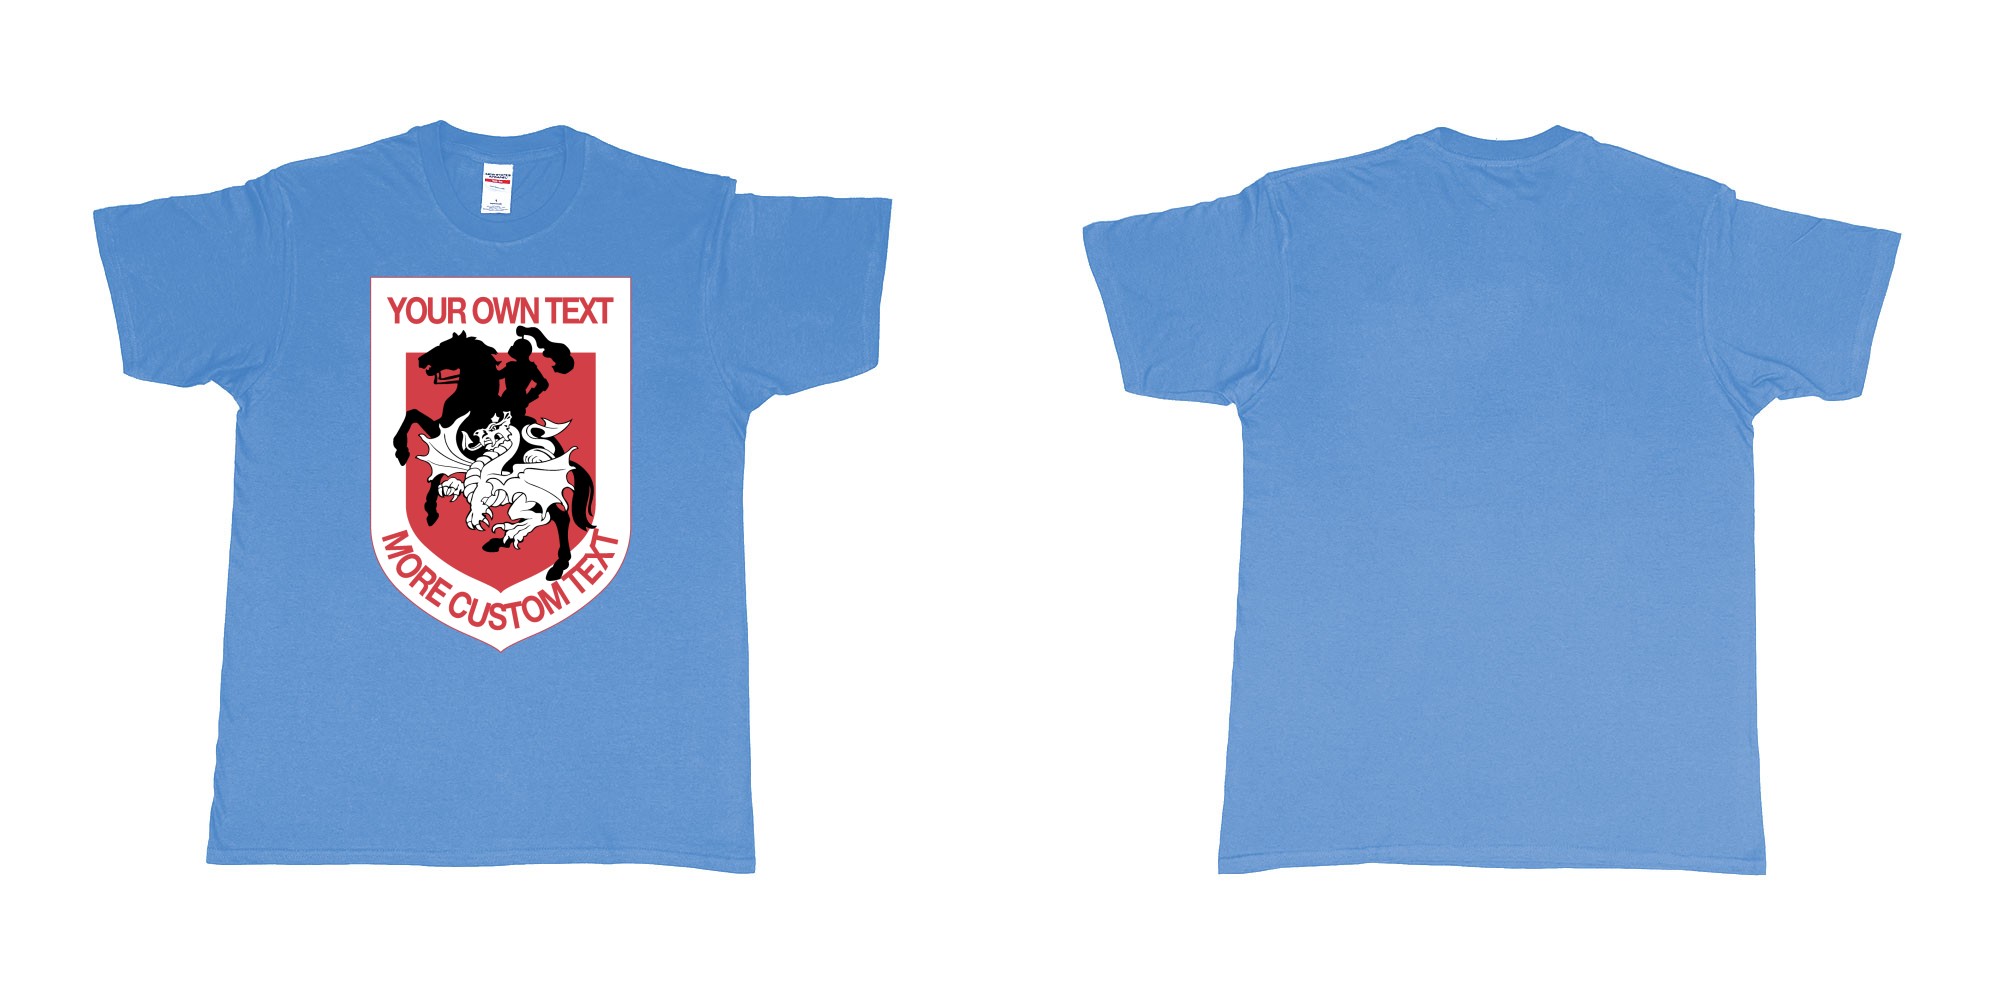 Custom tshirt design st george illawarra dragons custom design in fabric color carolina-blue choice your own text made in Bali by The Pirate Way